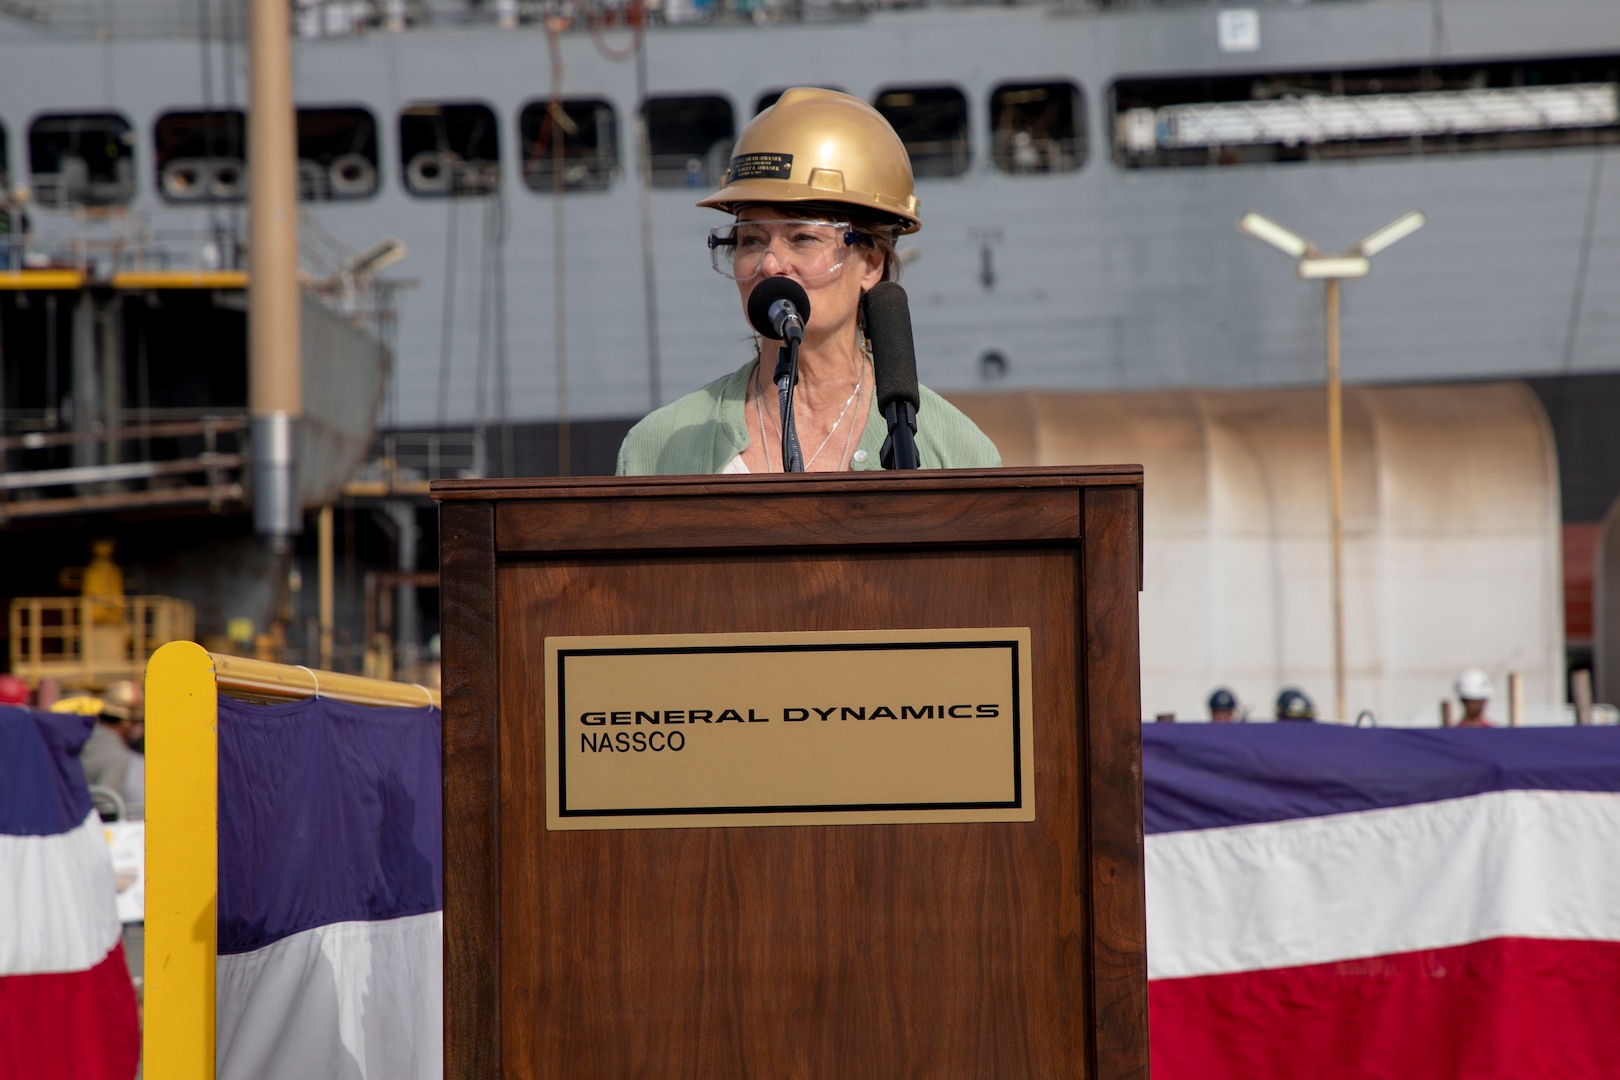 The keel for the future USS Robert E. Simanek (ESB 7), a Lewis B. Puller-class Expeditionary Sea Base (ESB), was laid at General Dynamics National Steel and Shipbuilding Company (GD-NASSCO) shipyard in San Diego, October 21.